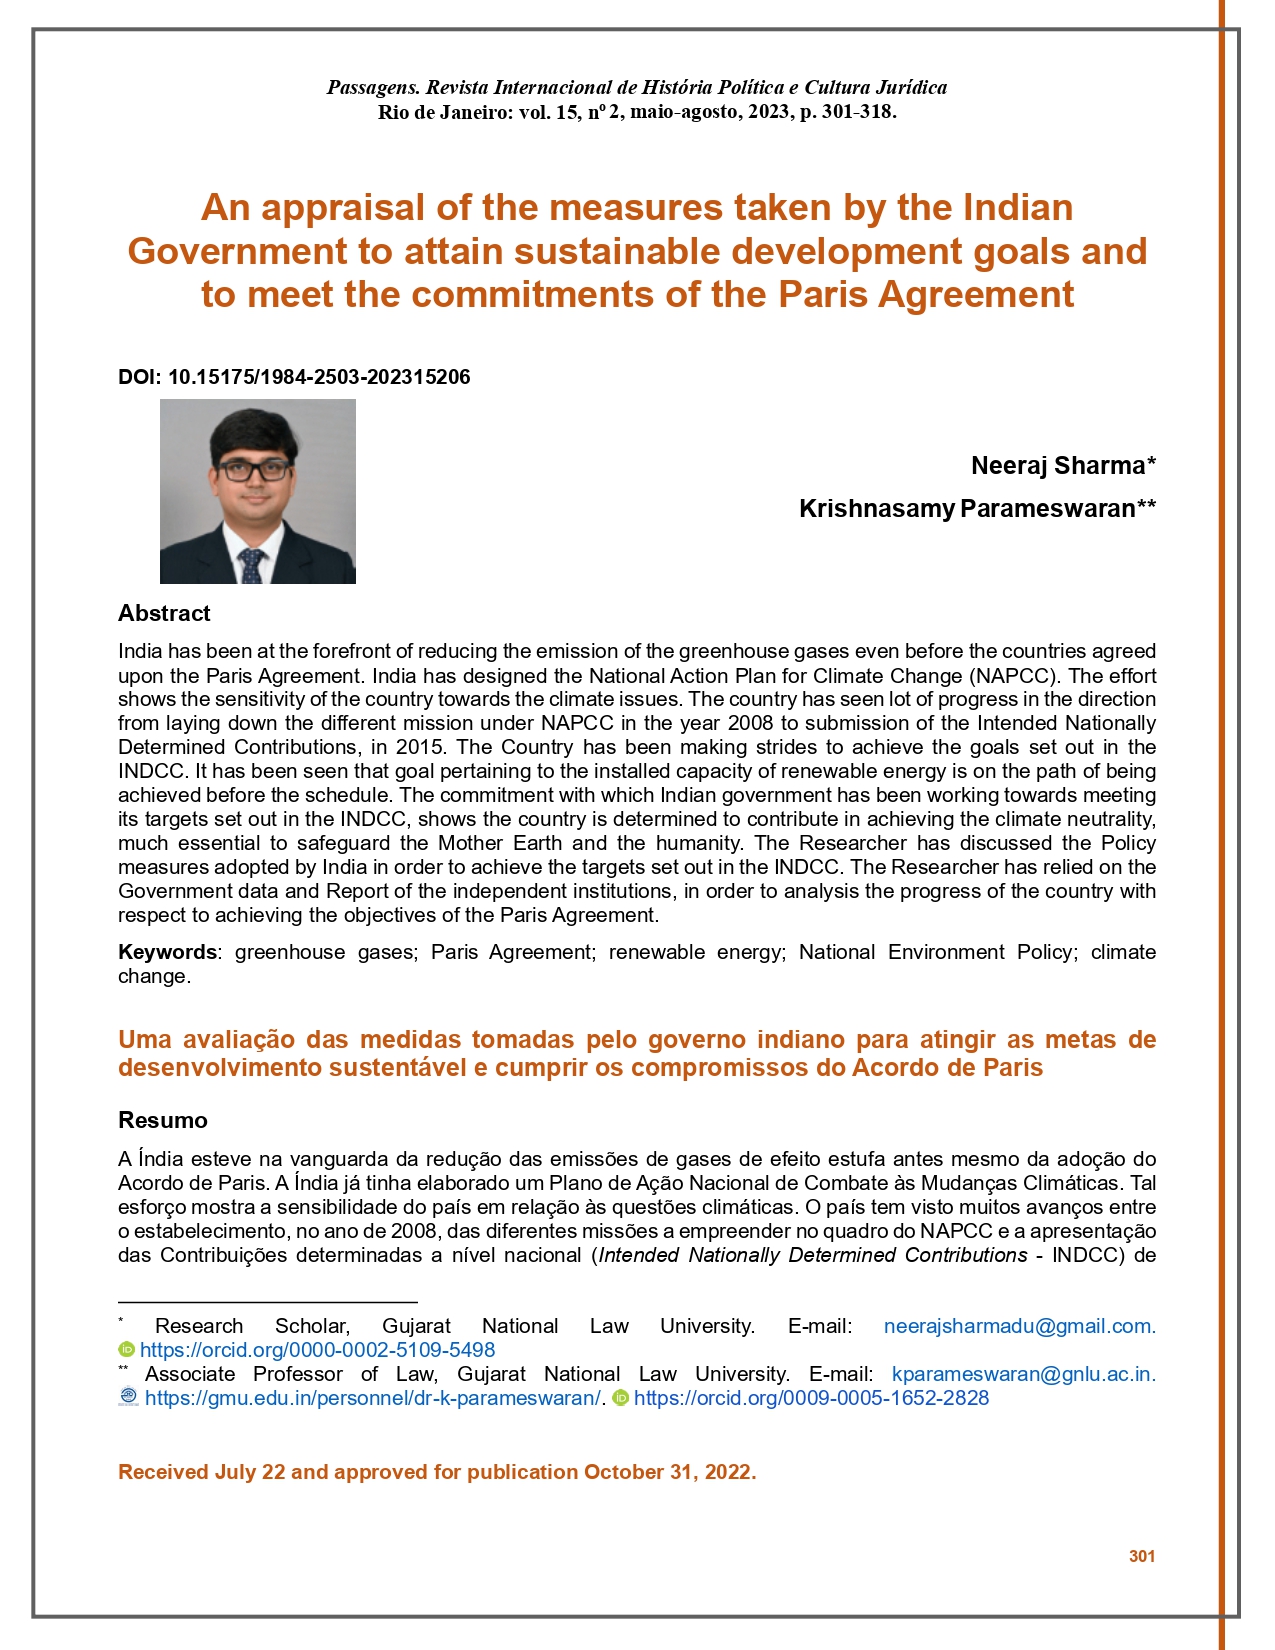 An Appraisal of the Measures Taken by the Indian Government to Attain Sustainable Development Goals and to Meet the Commitments of The Paris Agreement